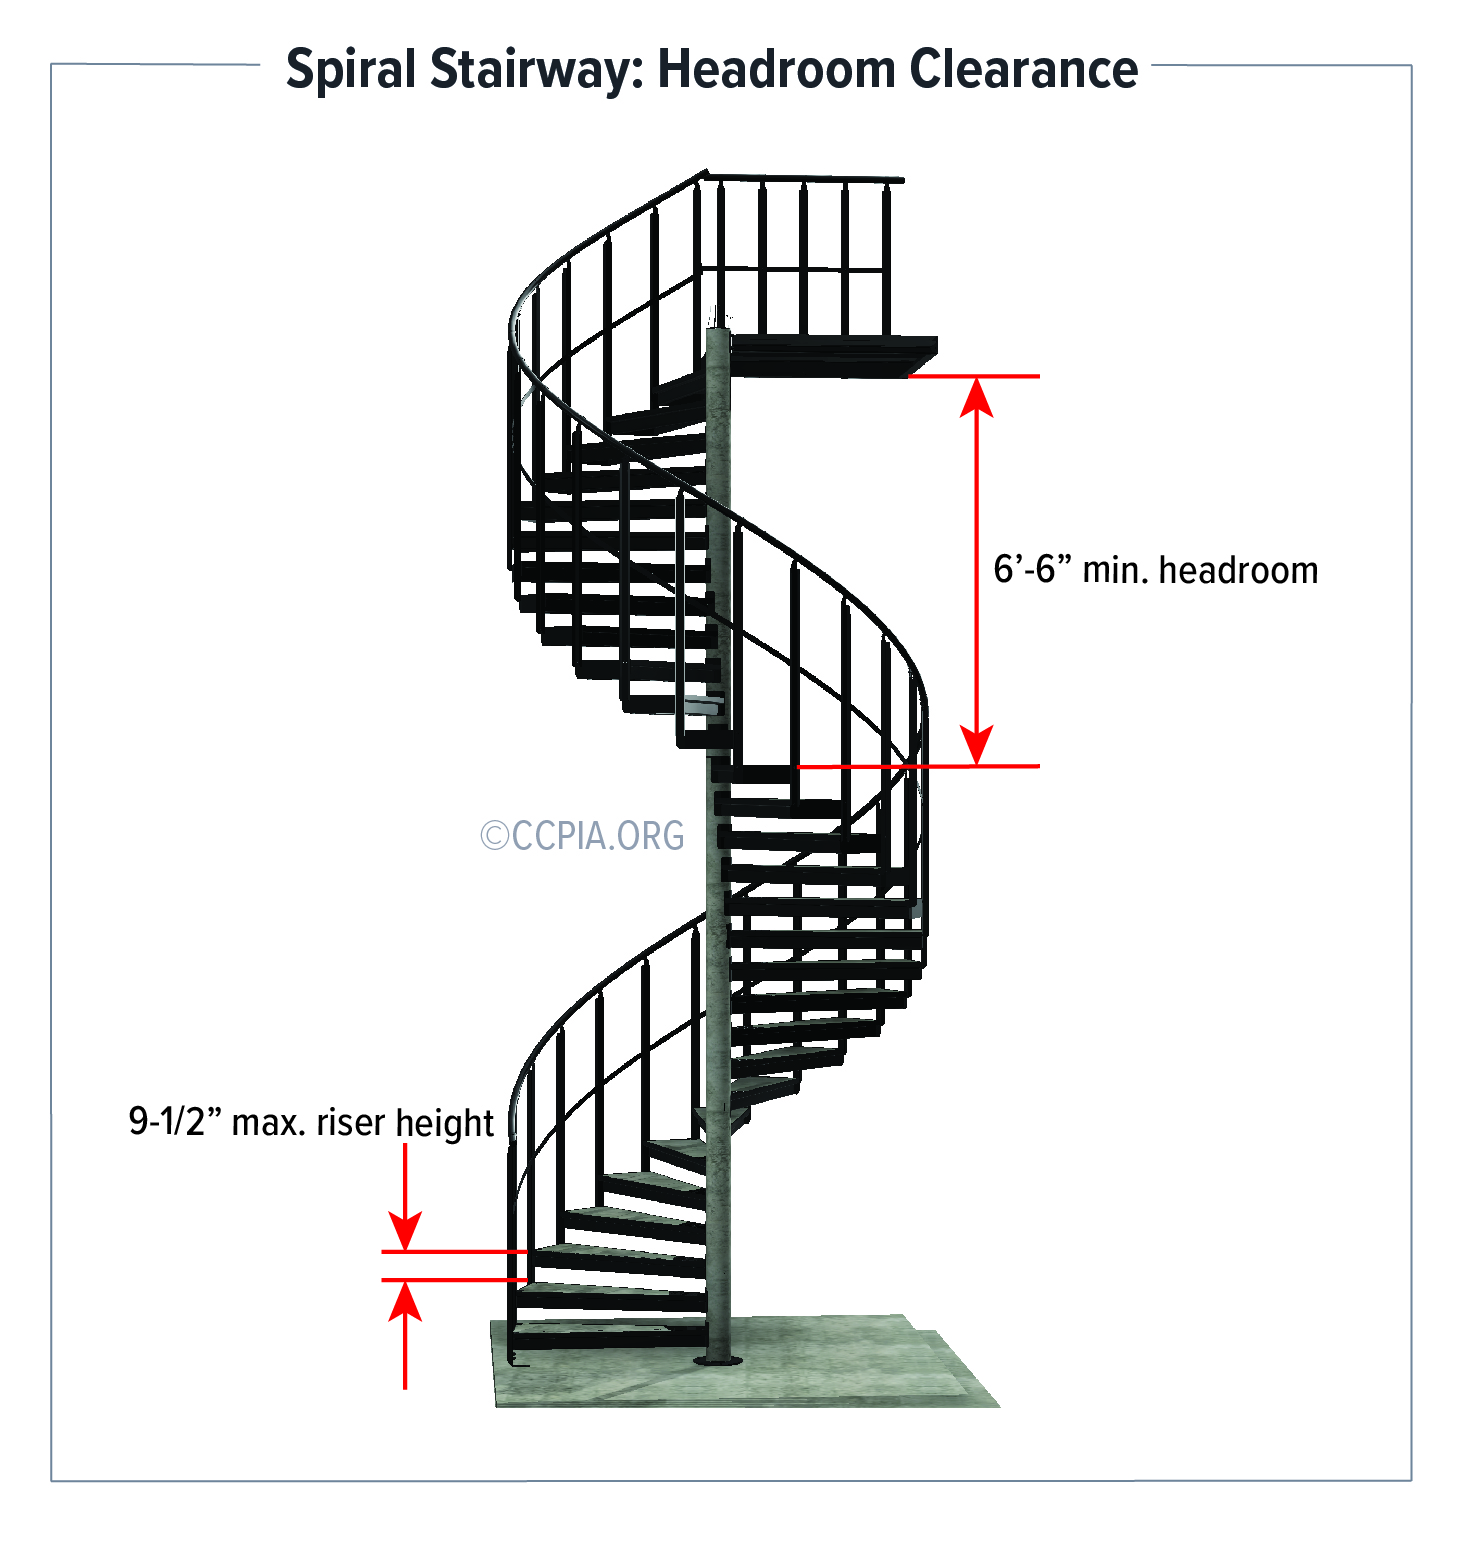 Spiral Stairway: Headroom Clearance